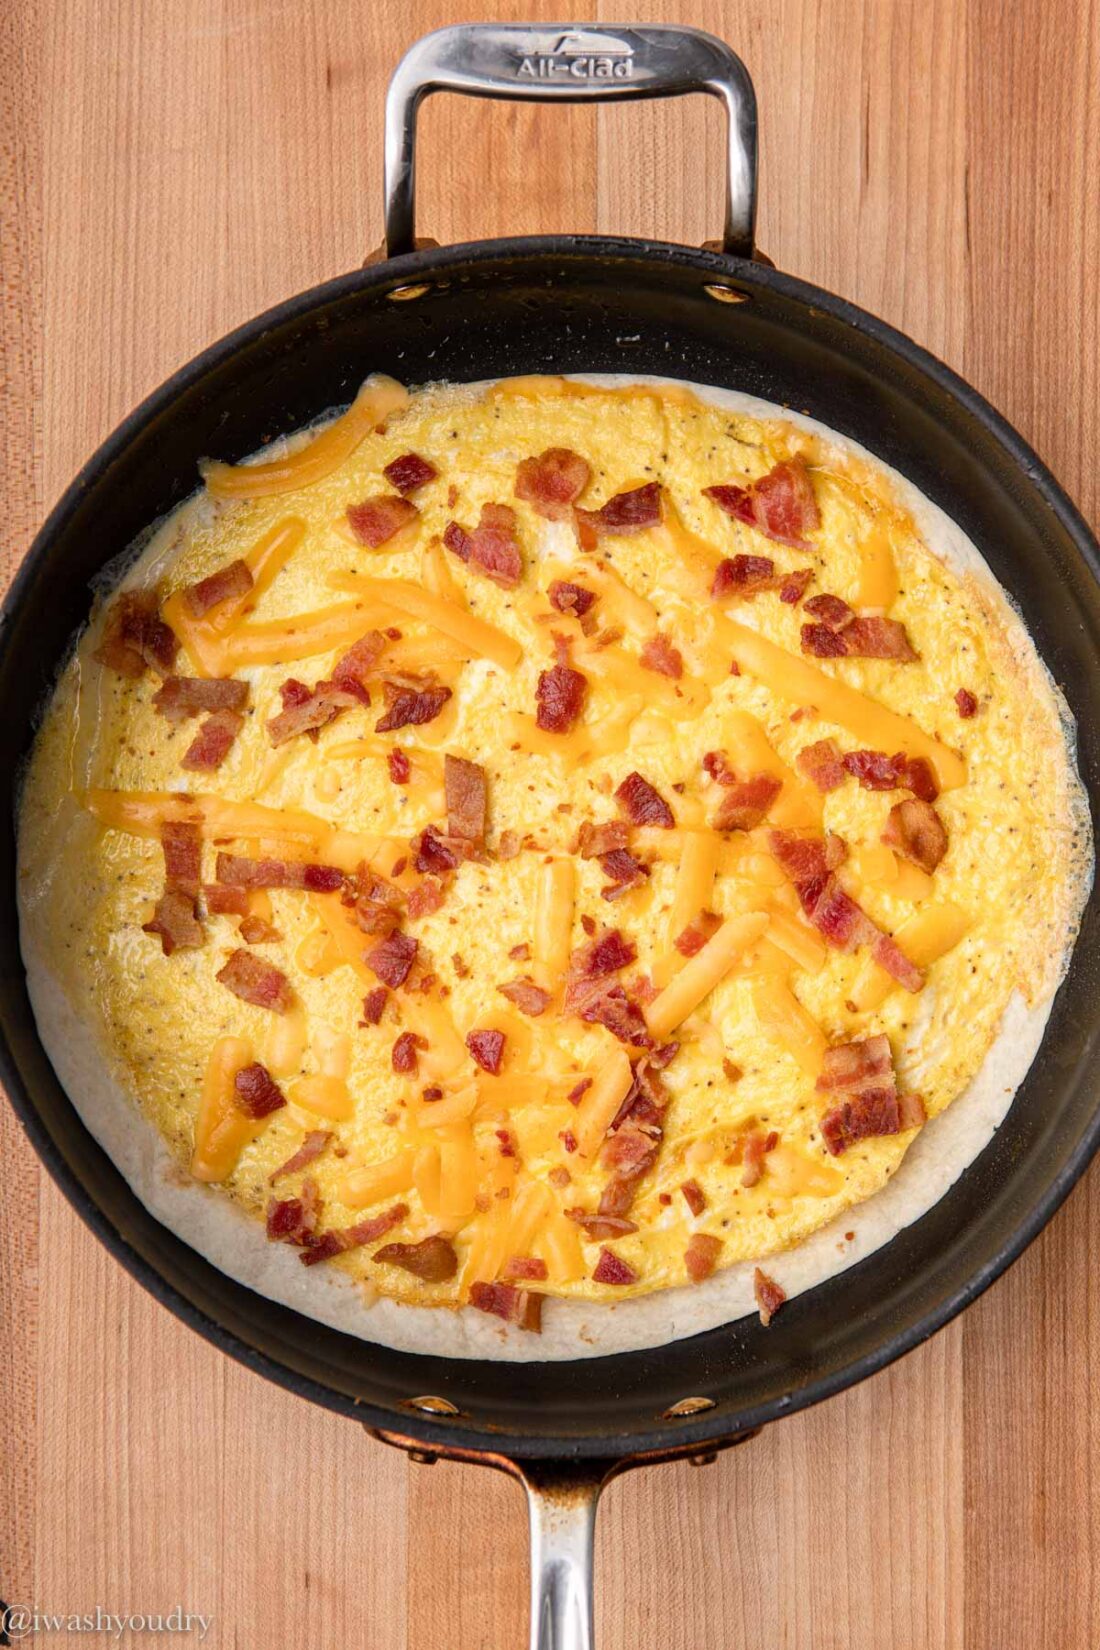 Cooked eggs, cheese and bacon on tortilla in a frying pan.